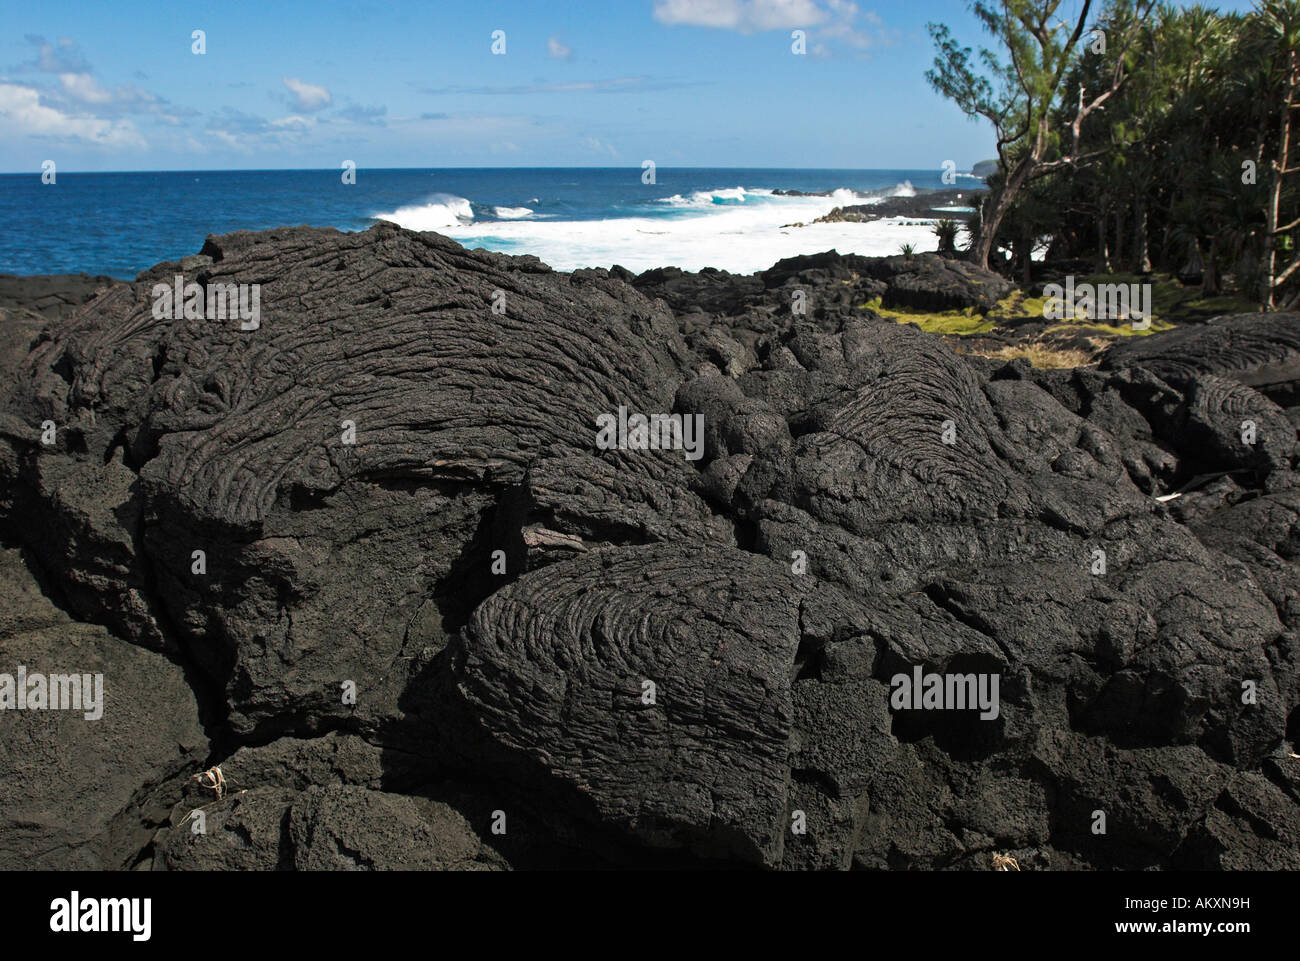 Coast with volcanic rocks in southern La Reunion Island, France, Africa Stock Photo